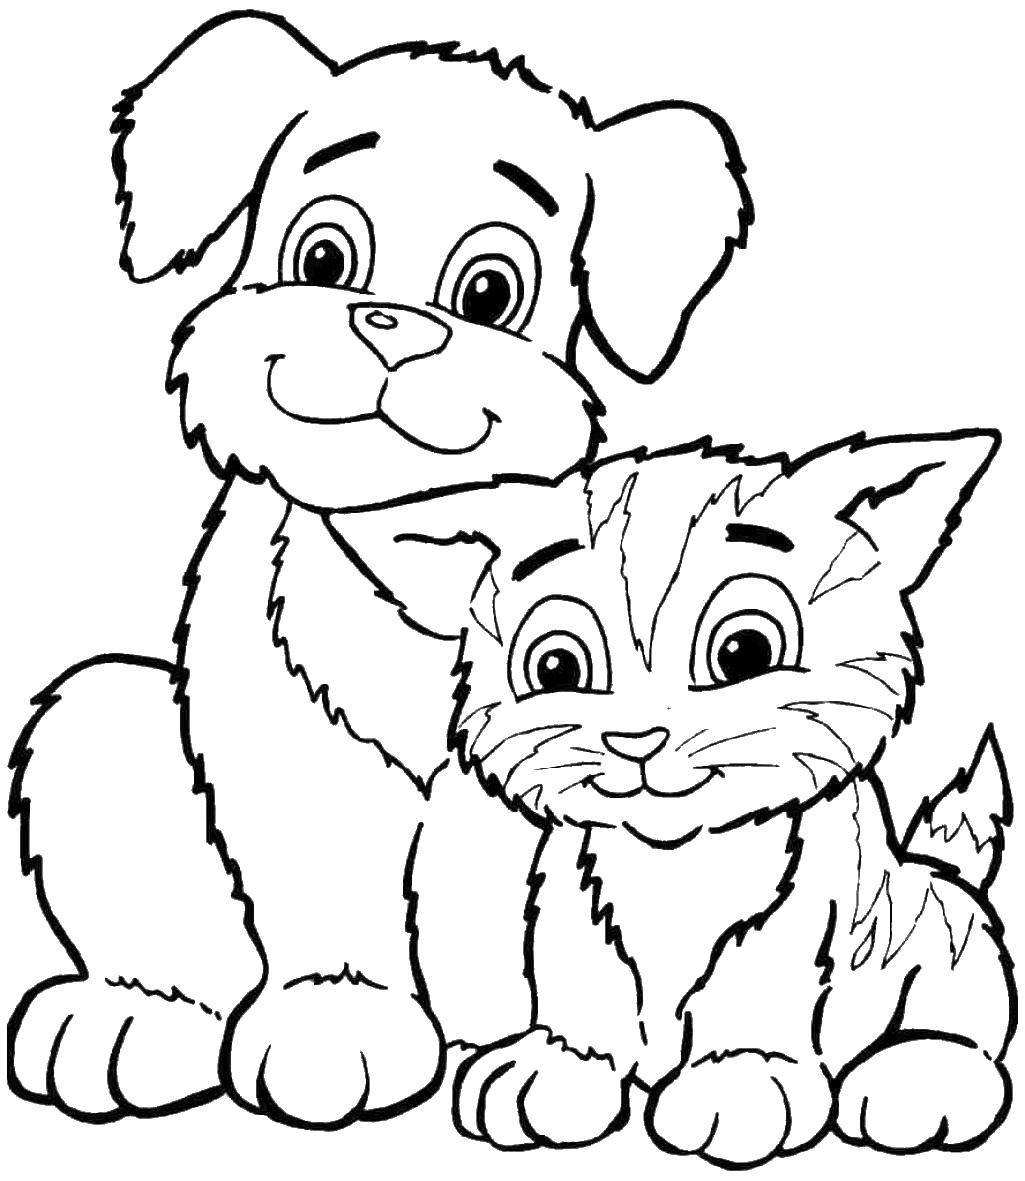 Coloring Puppy and kitten. Category animals cubs . Tags:  kitten, puppy.